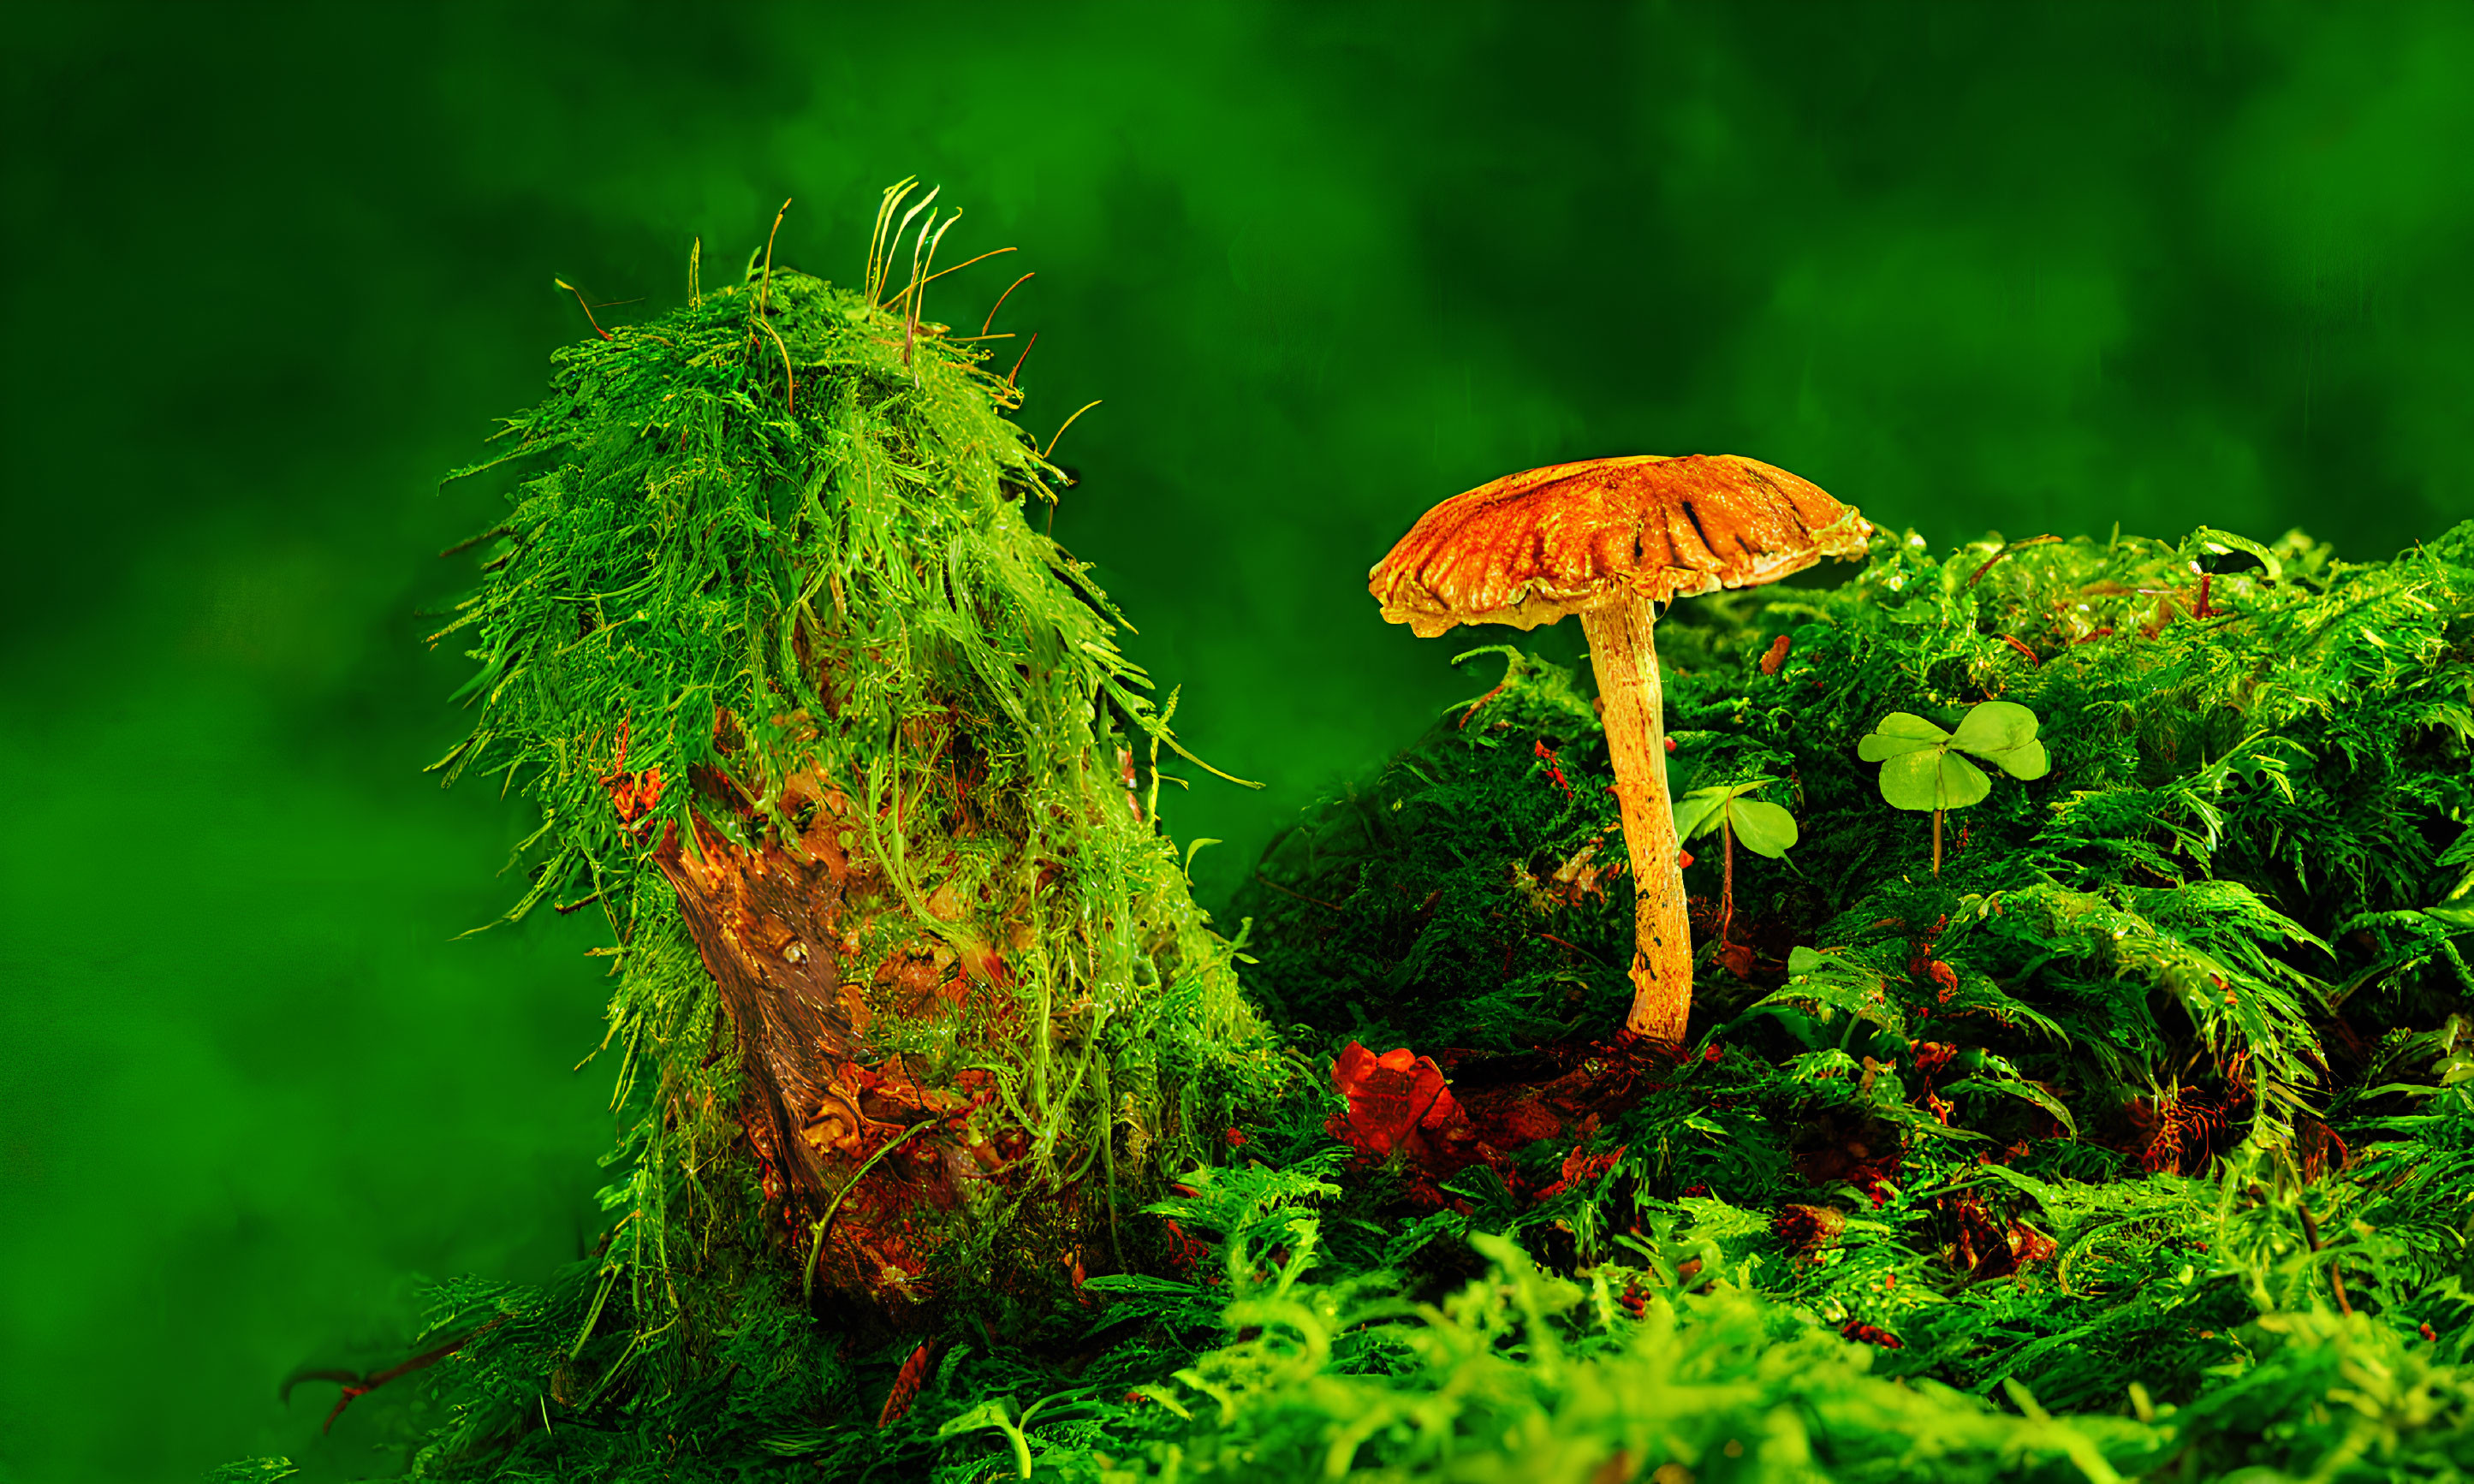 Colorful mushroom in lush green moss with rich foliage backdrop and clover-like plant